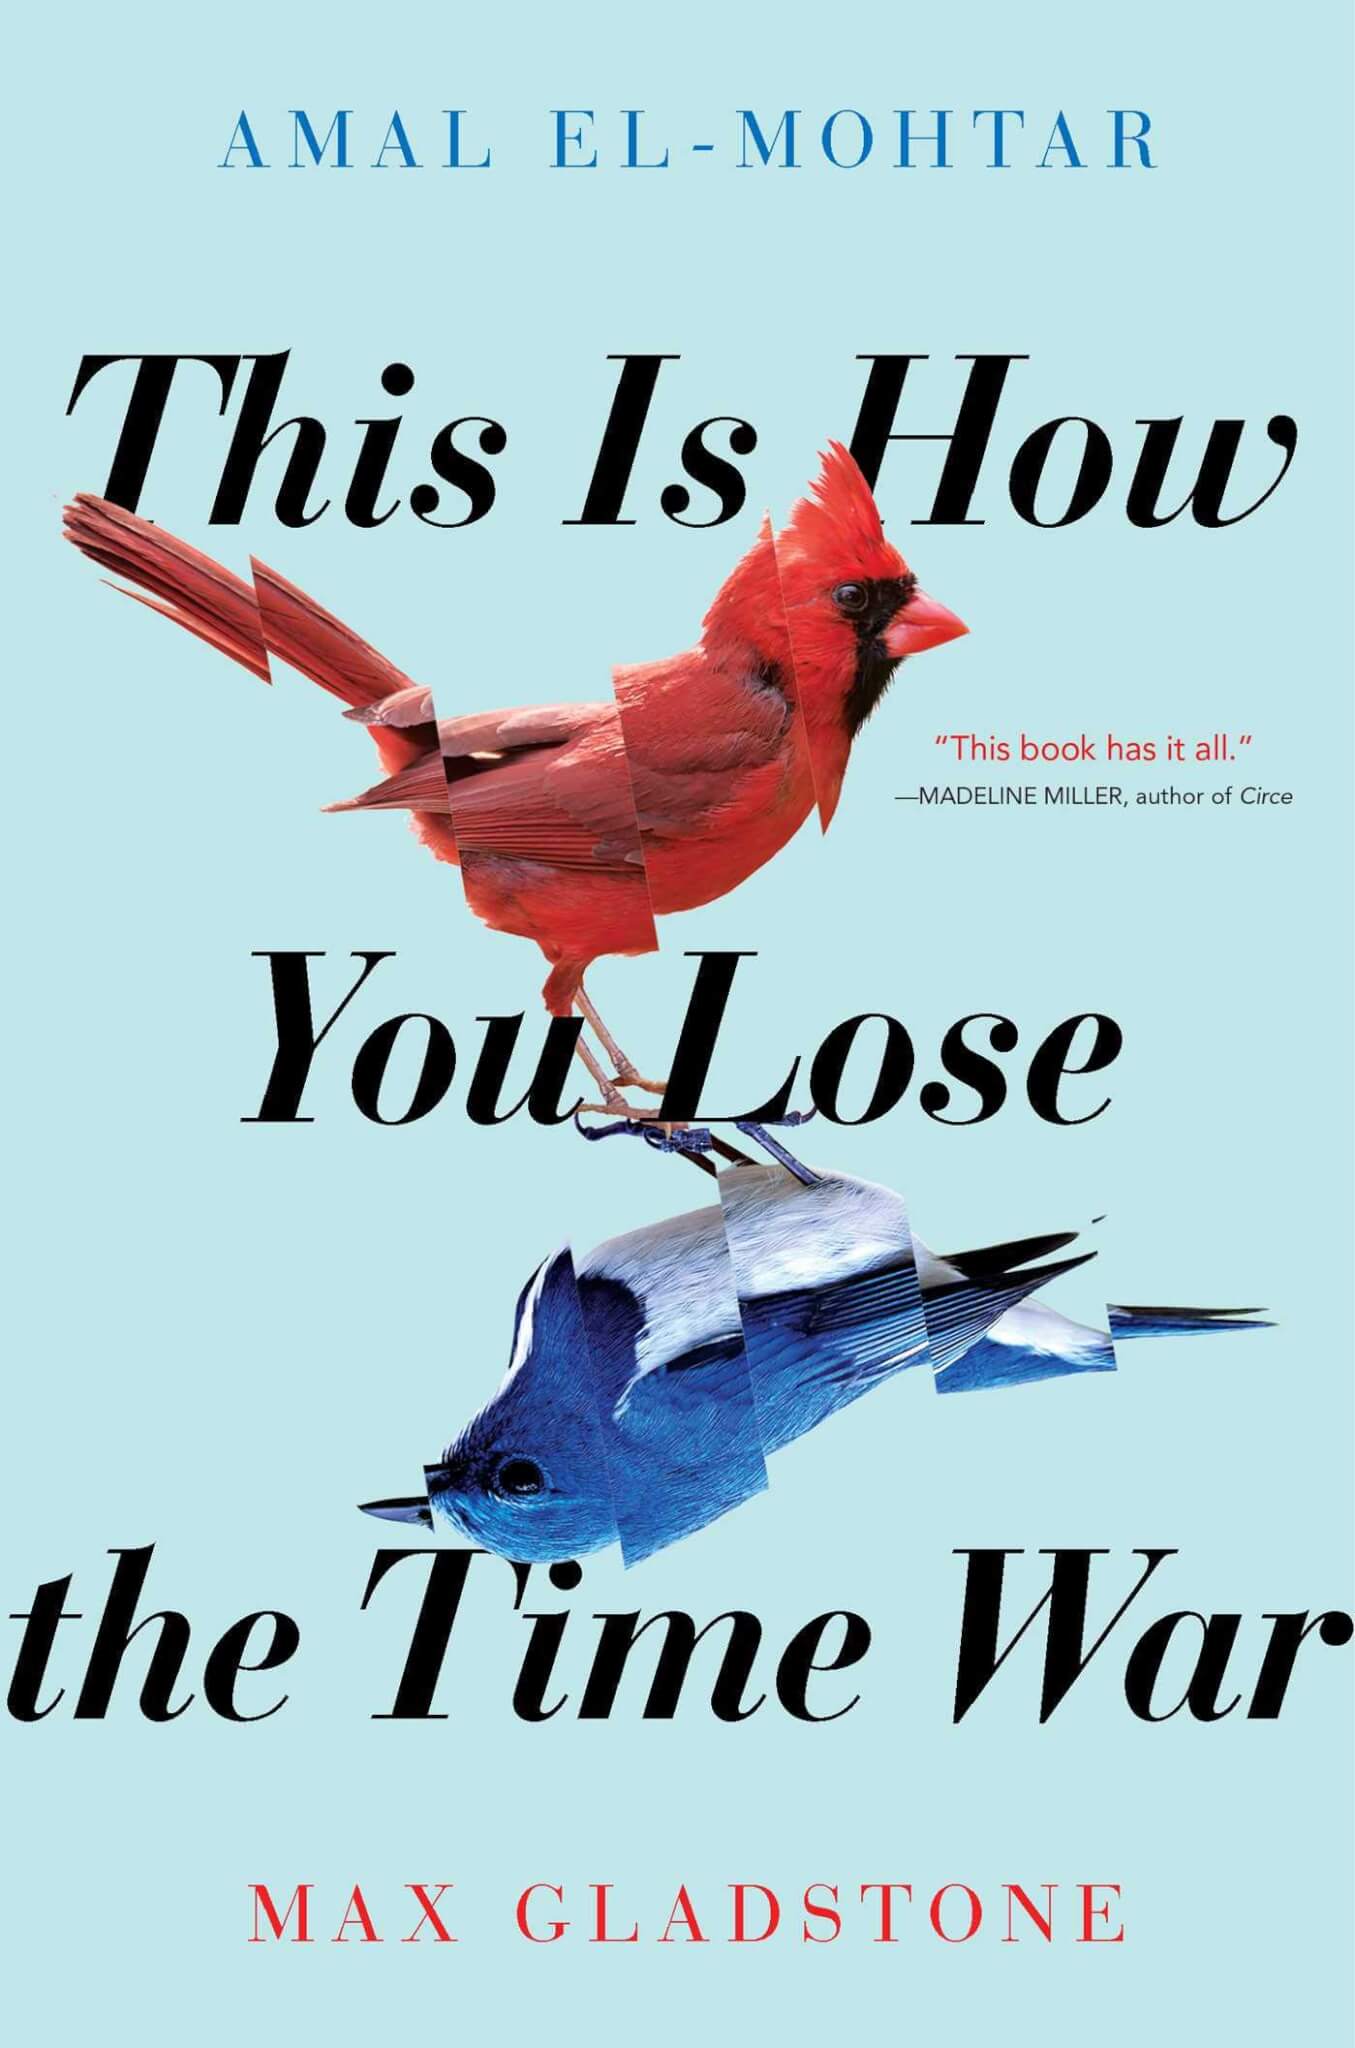 2. “This is How You Lose the Time War” (2019) by Amal El-Mohtar and Max Gladstone